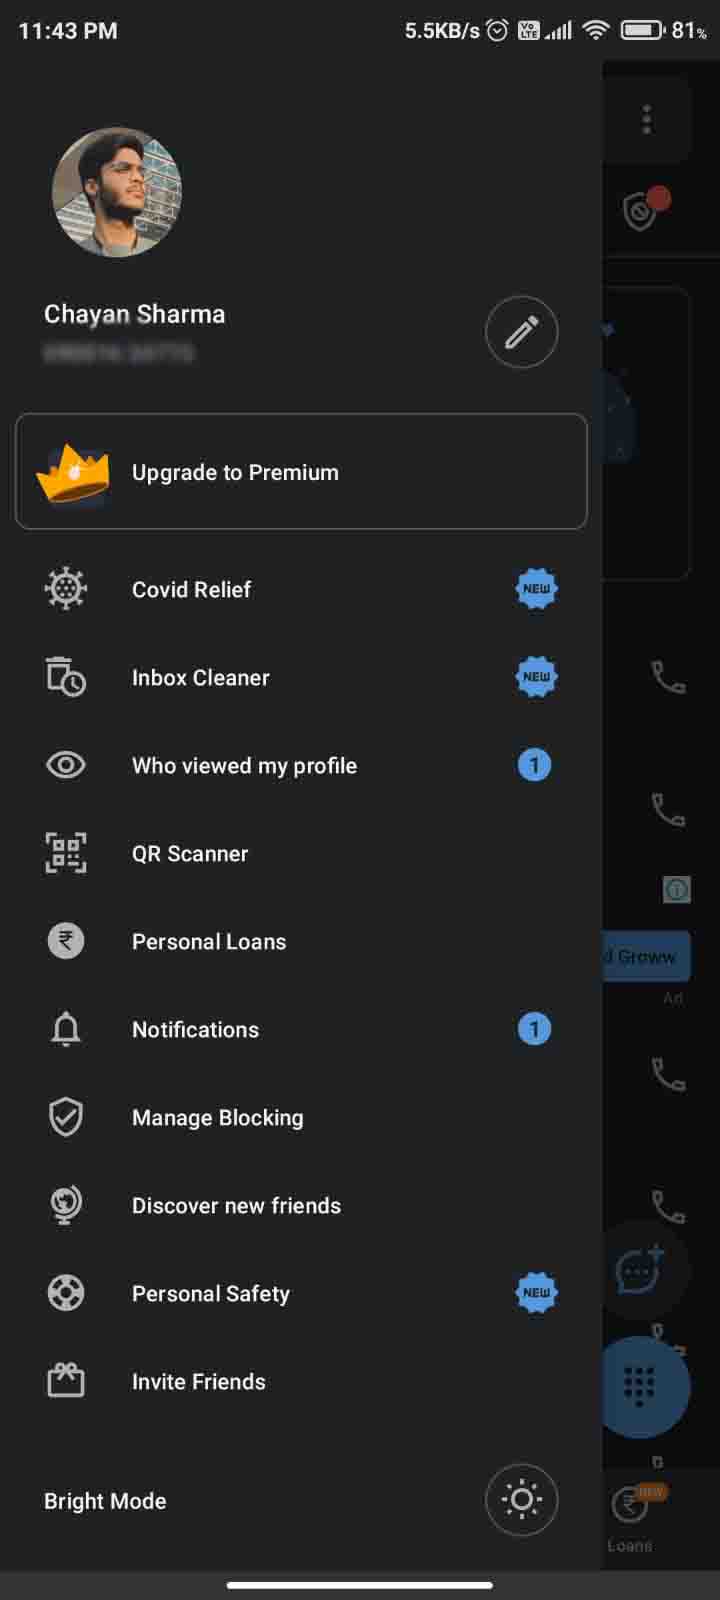 how to change your name on truecaller, change name on truecaller, truecaller, change your name on truecaller, truecaller account, update your name on truecalle, update name on truecaller